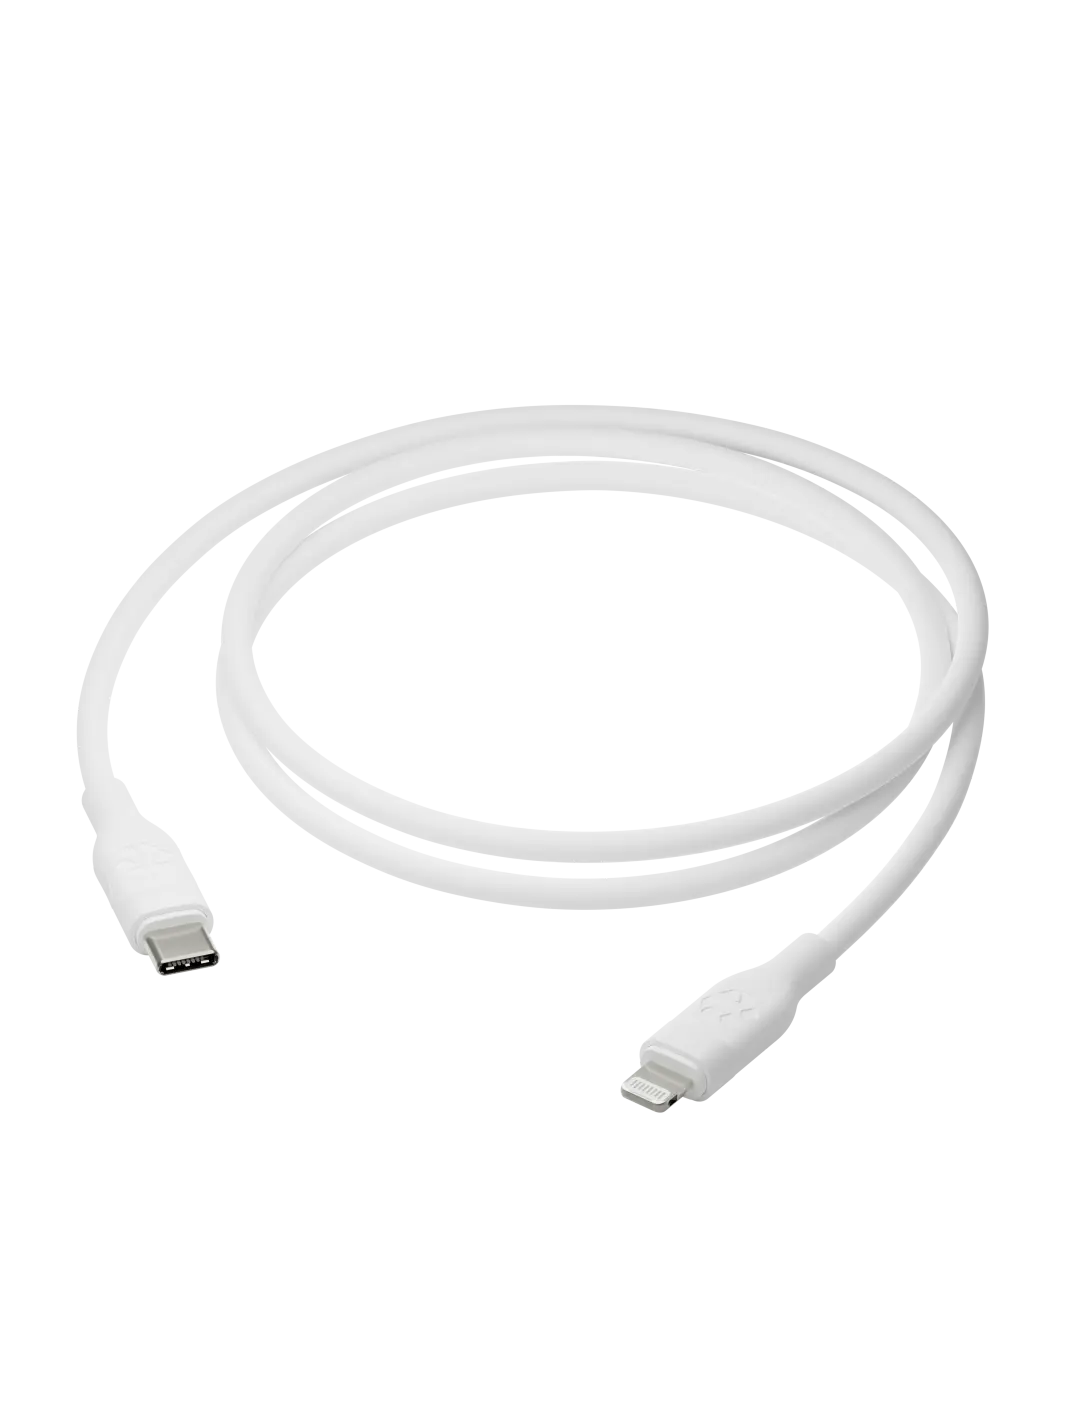 CABLES - STANDARD White USB-C to Lightning 1.2m Cables